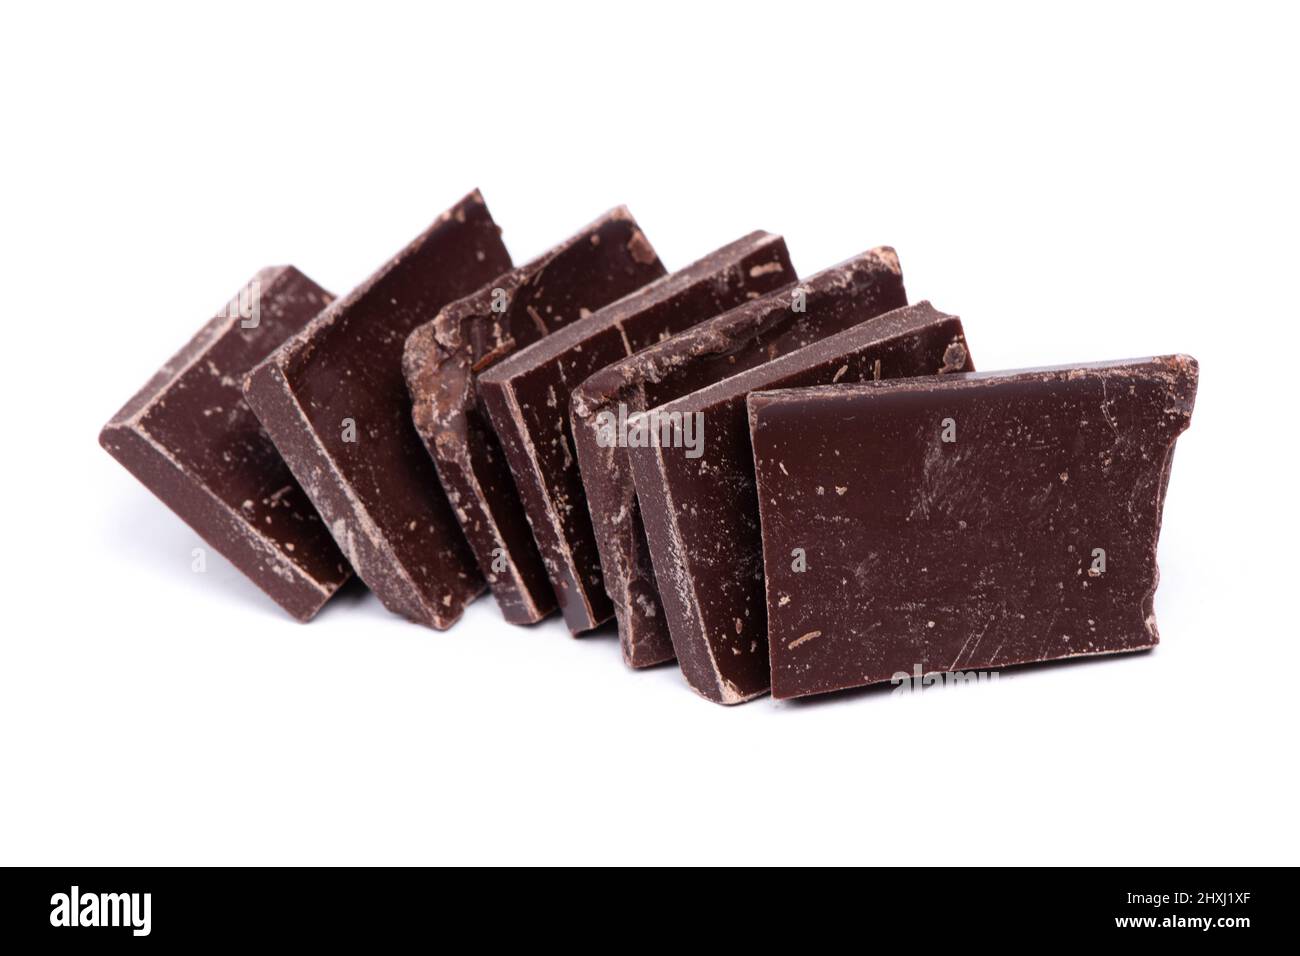 Pieces of chocolate bar isolated on white background Stock Photo